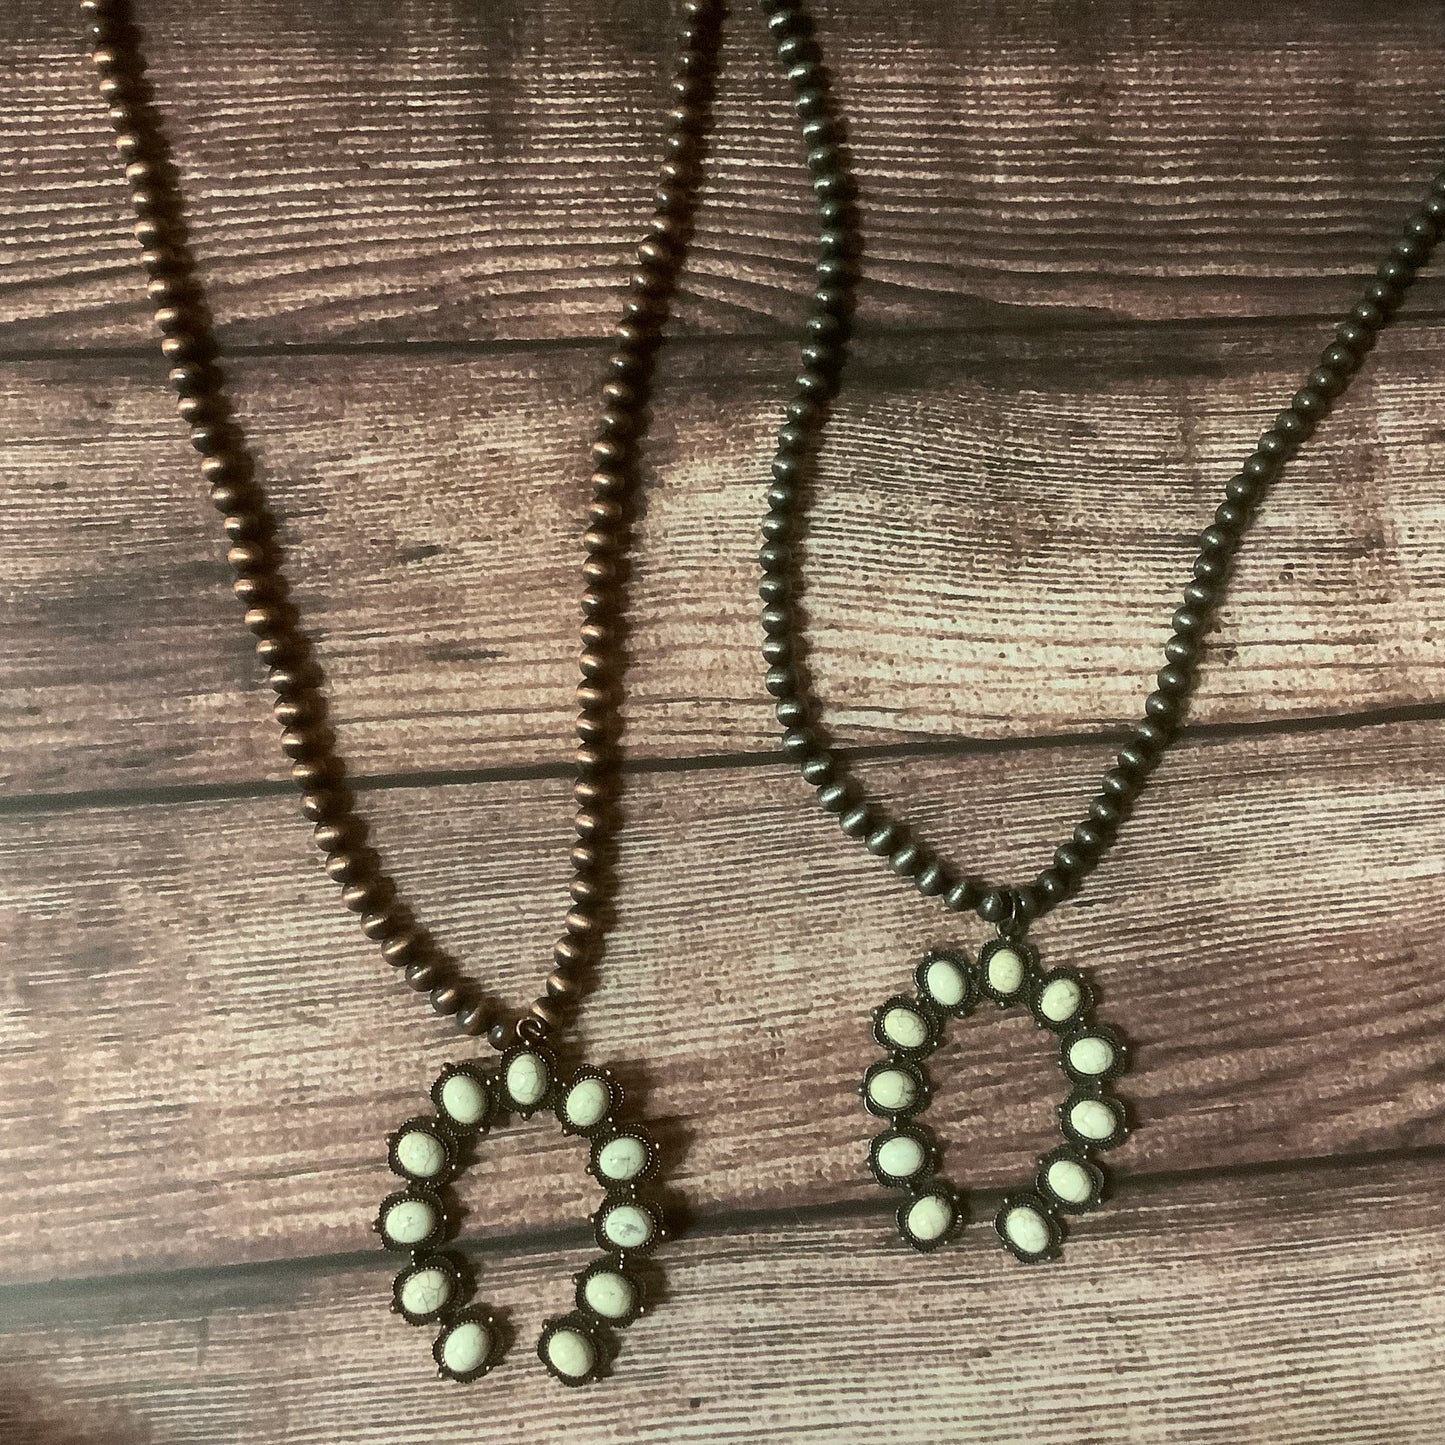 Globe bead necklace in bronze and silver